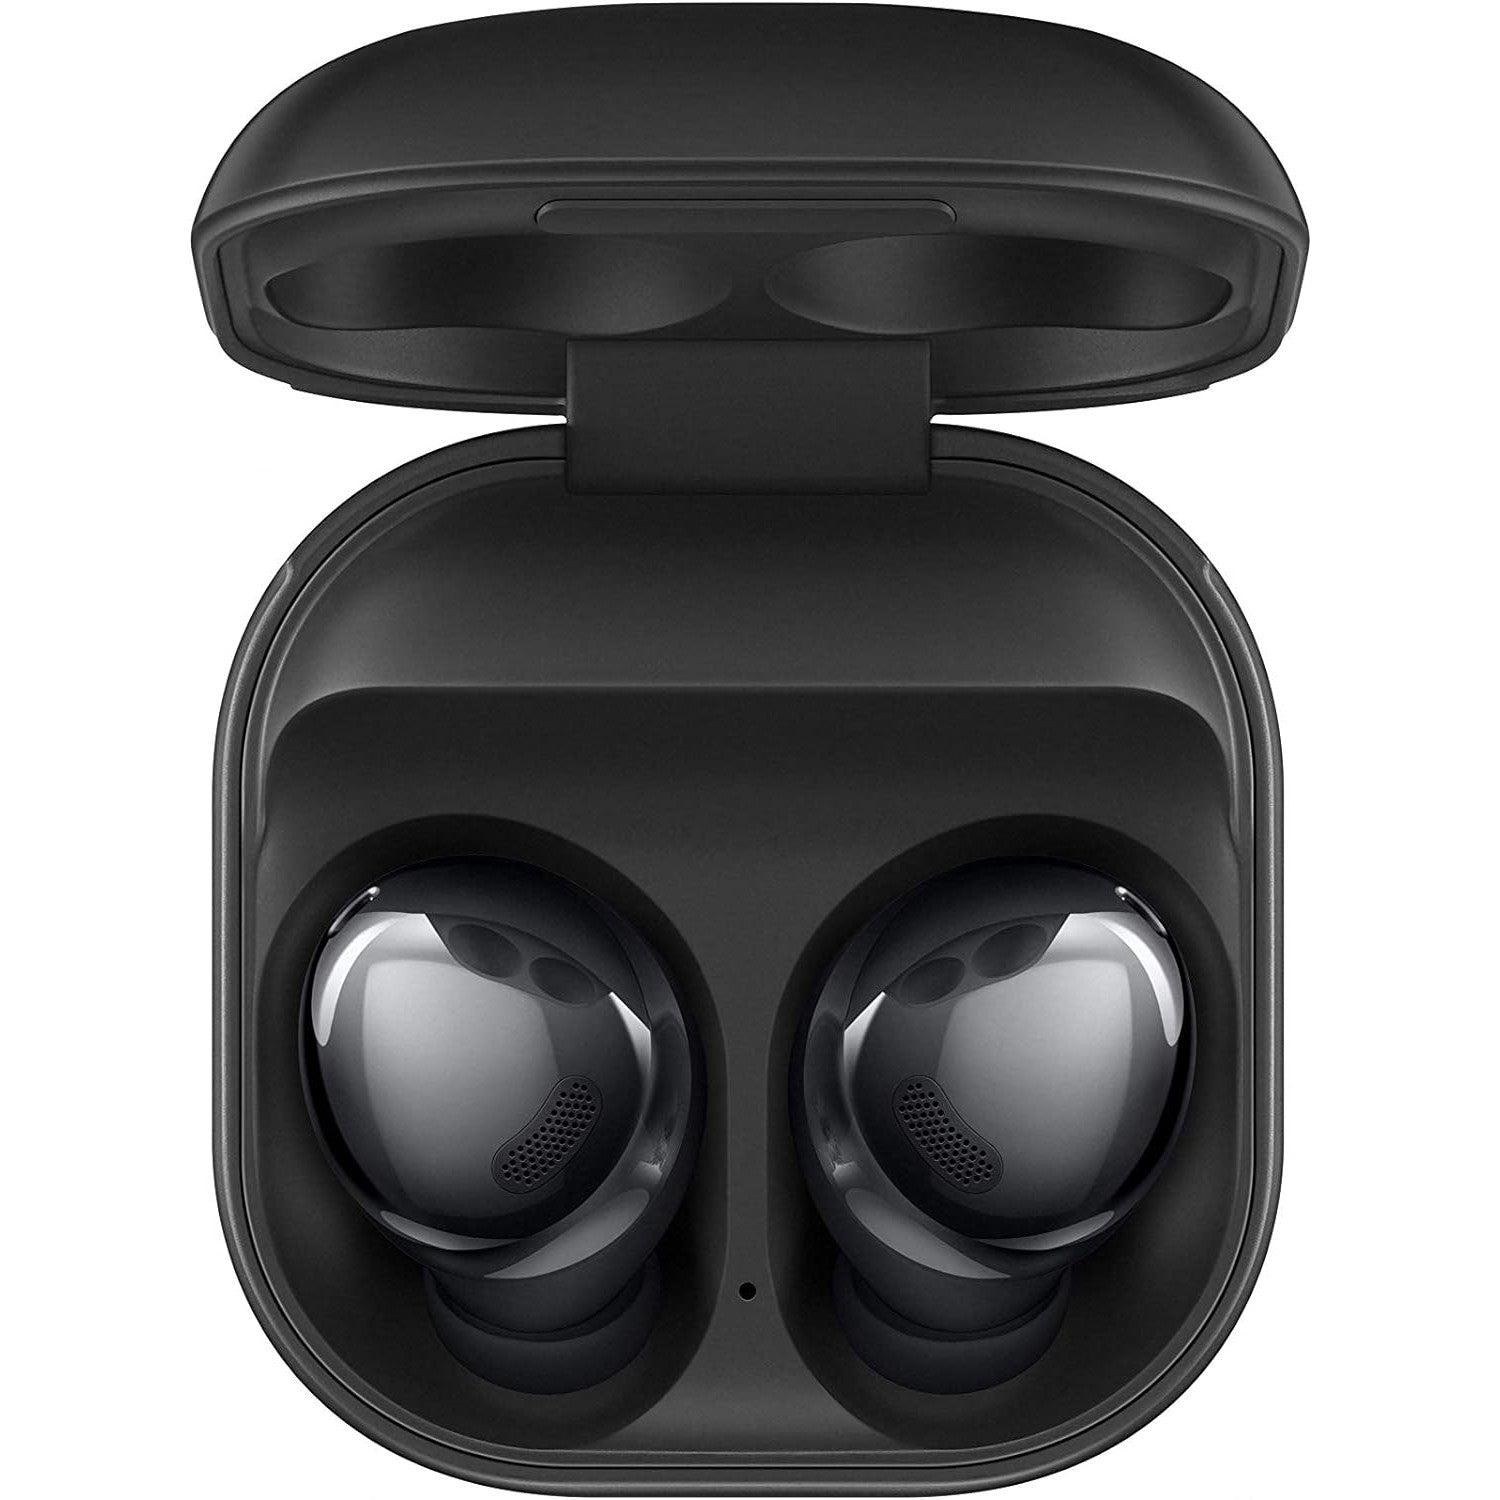 Samsung Galaxy Buds Pro Earbuds - New | Stock Must Go